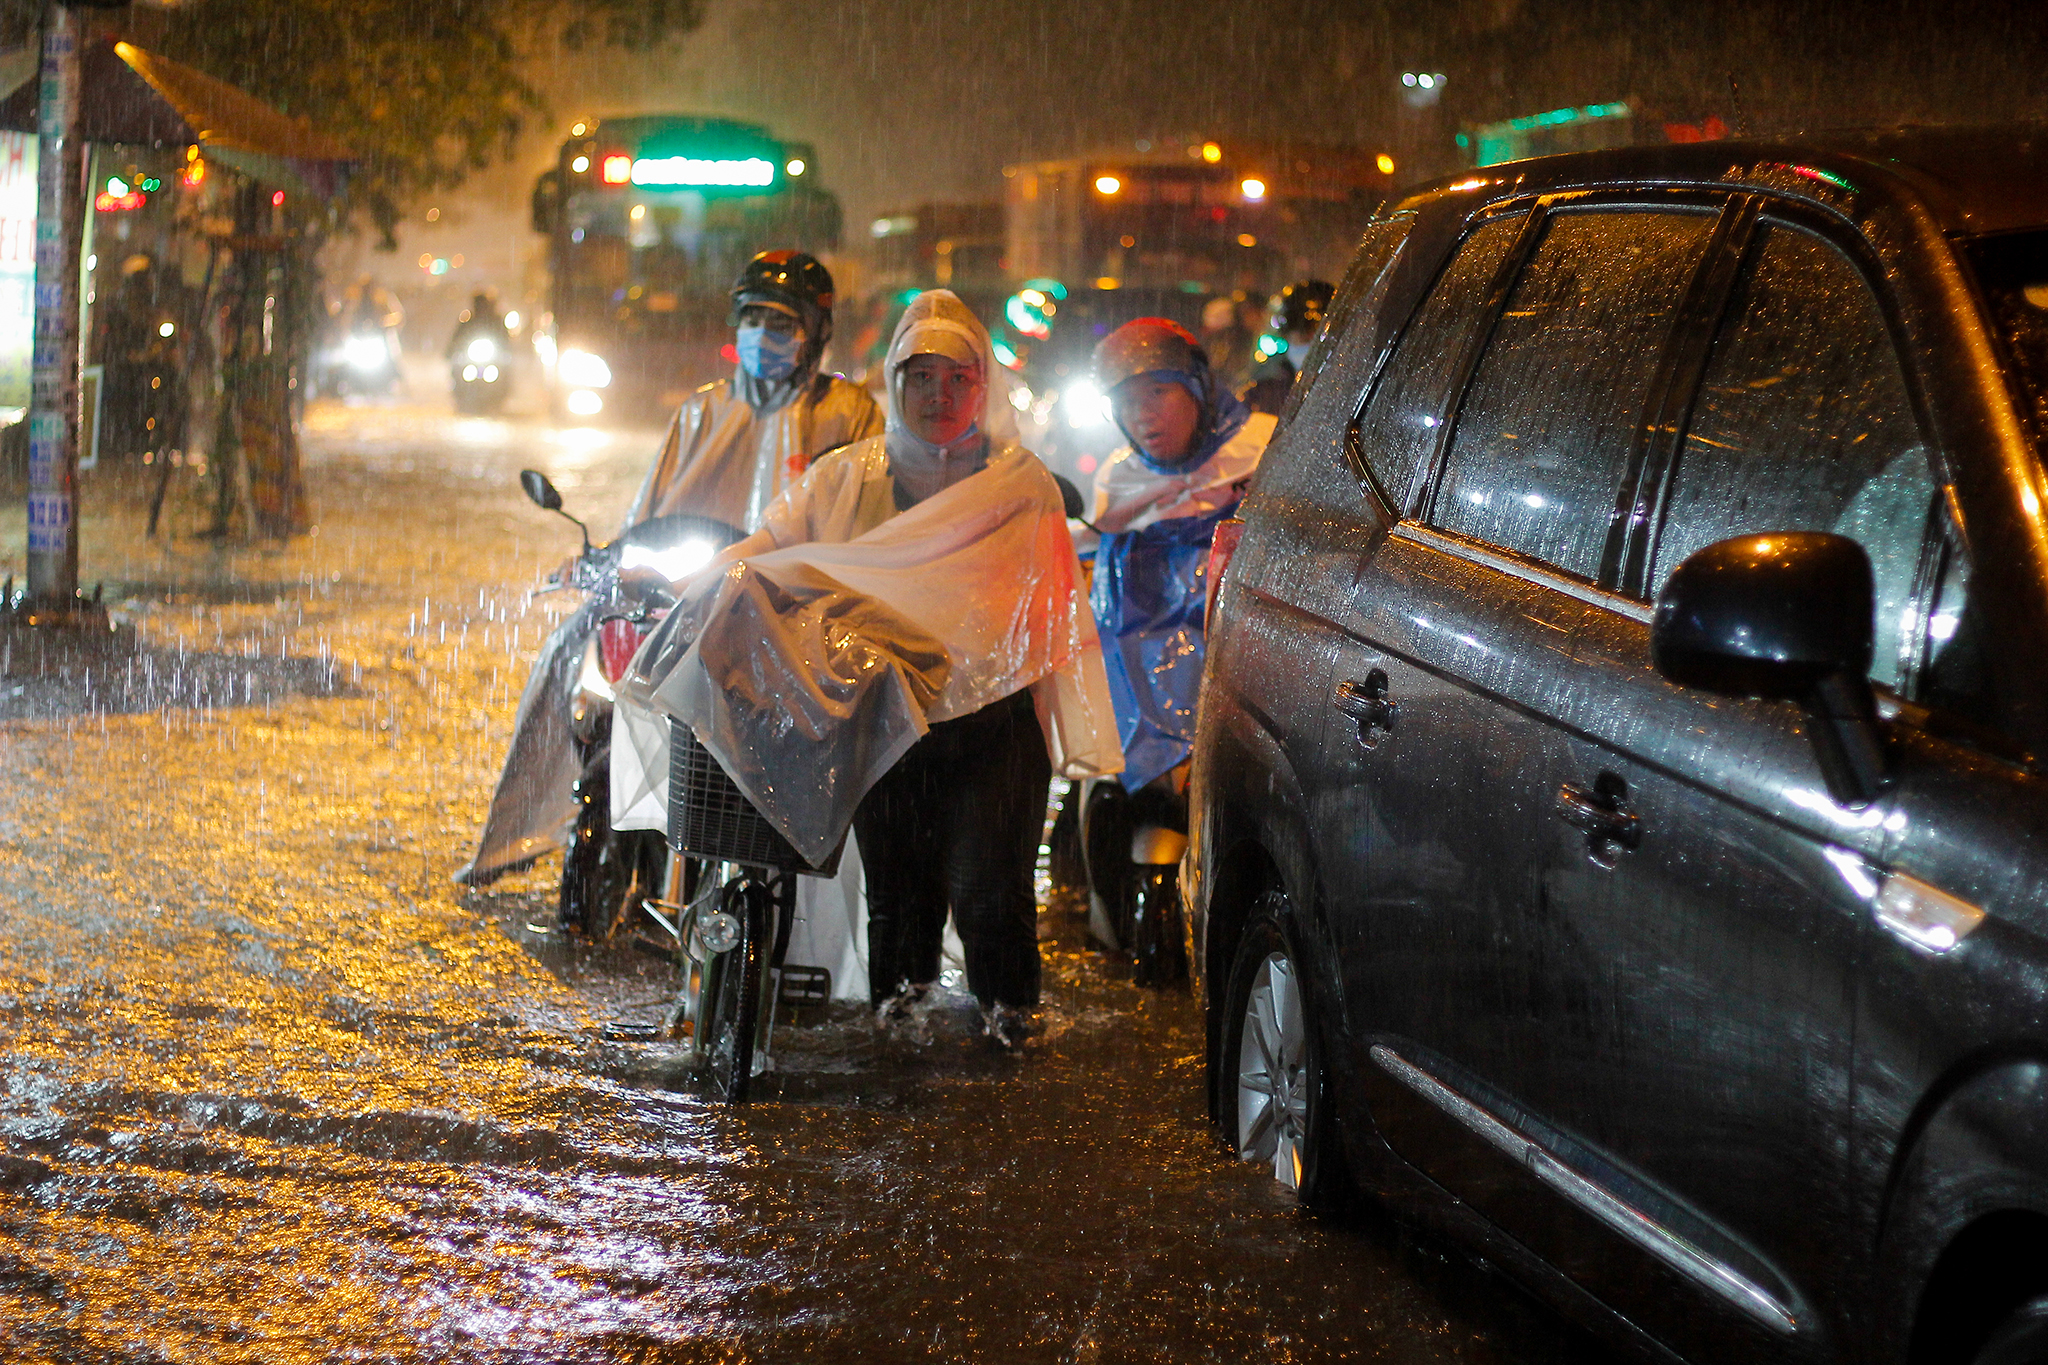 Southern Vietnam to have more extended rainy season this year